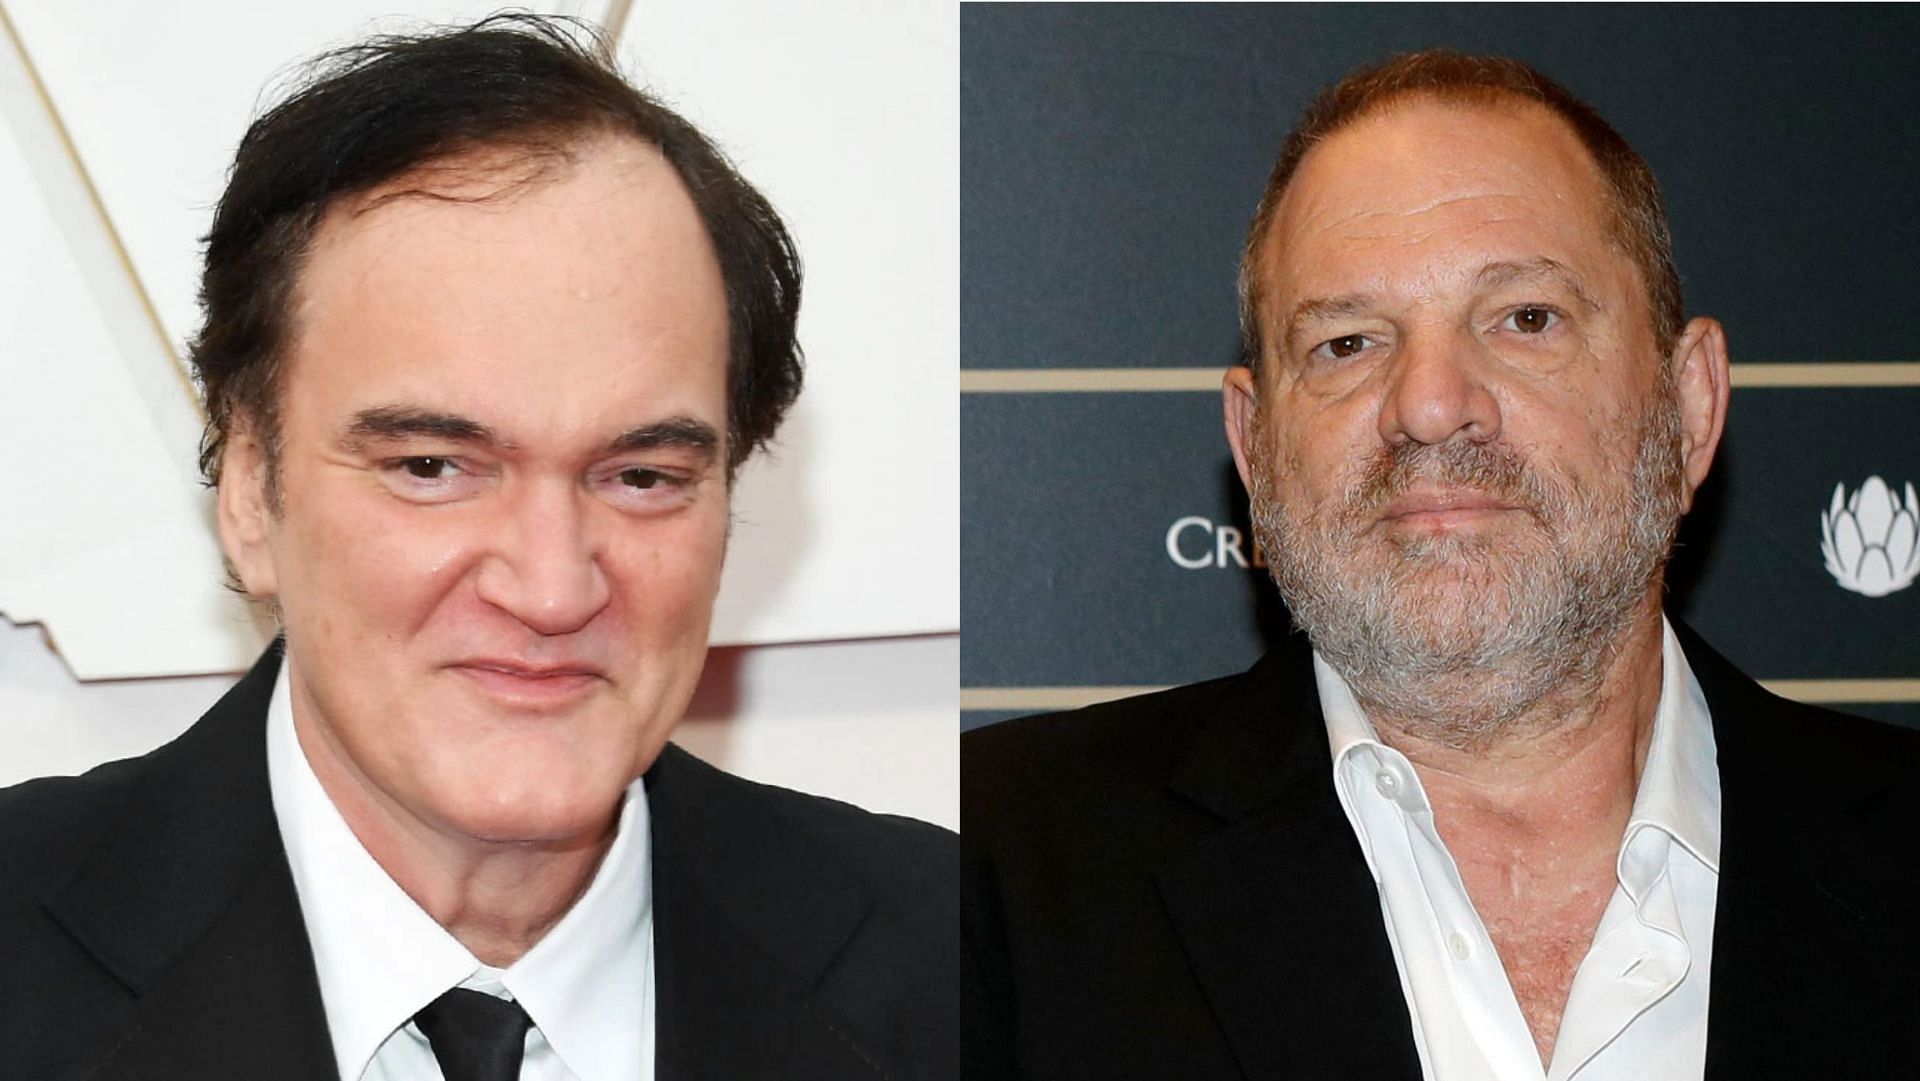 Quentin Tarantino collaborated with Harvey Weinstein on nine films. (Image via Kevin Mazur/Getty, Andreas Rentz/Getty)